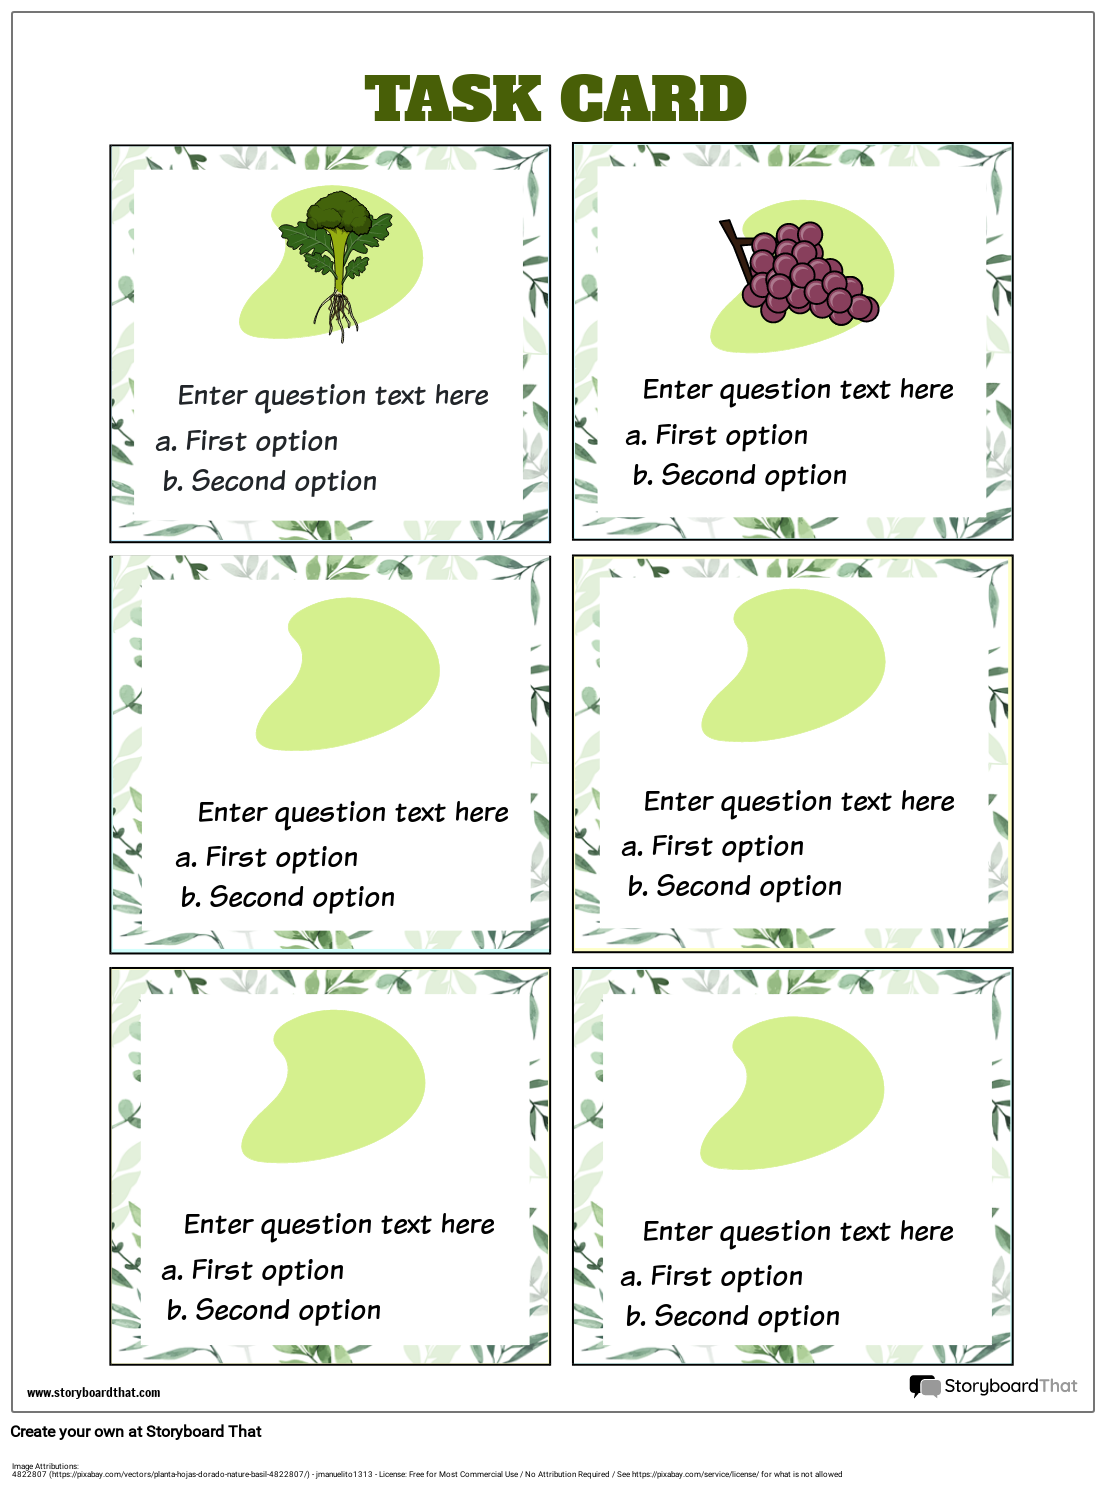 Task cards with options